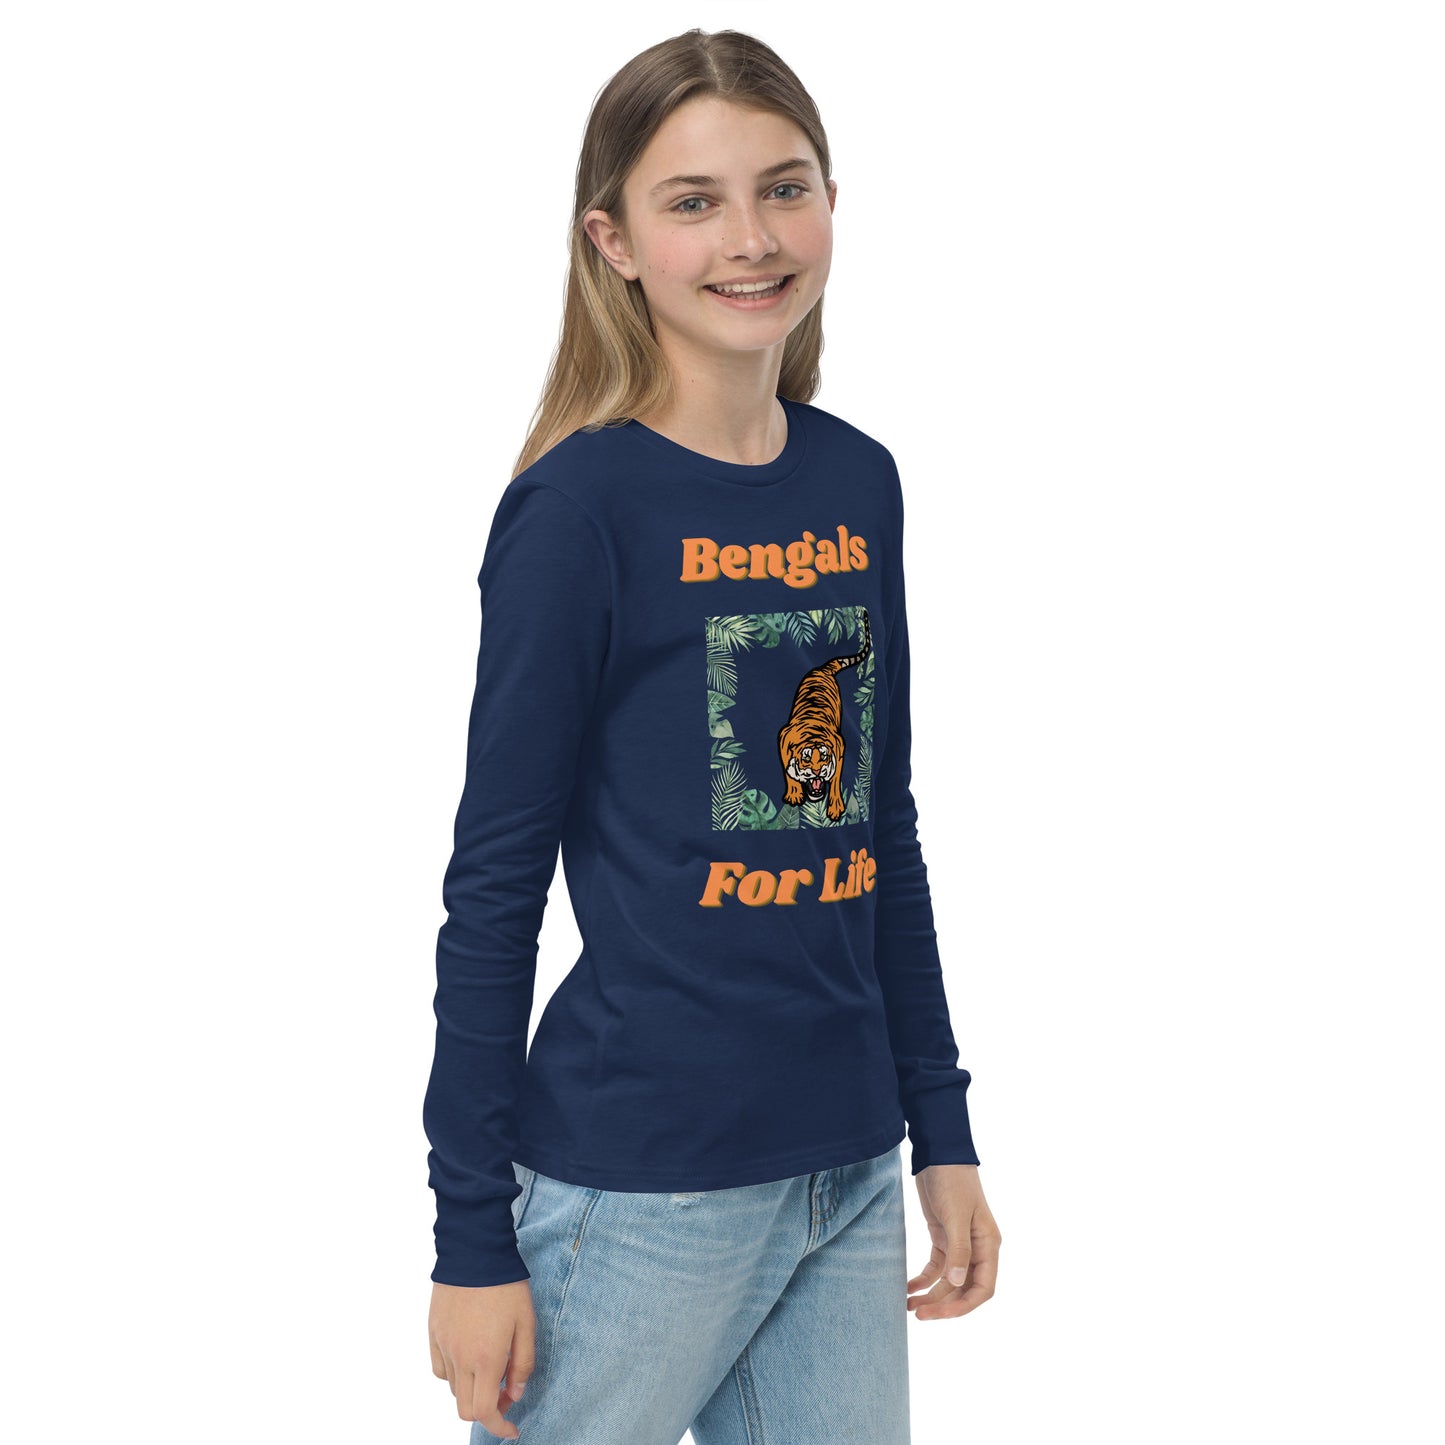 Bengals for Life Youth long sleeve tee